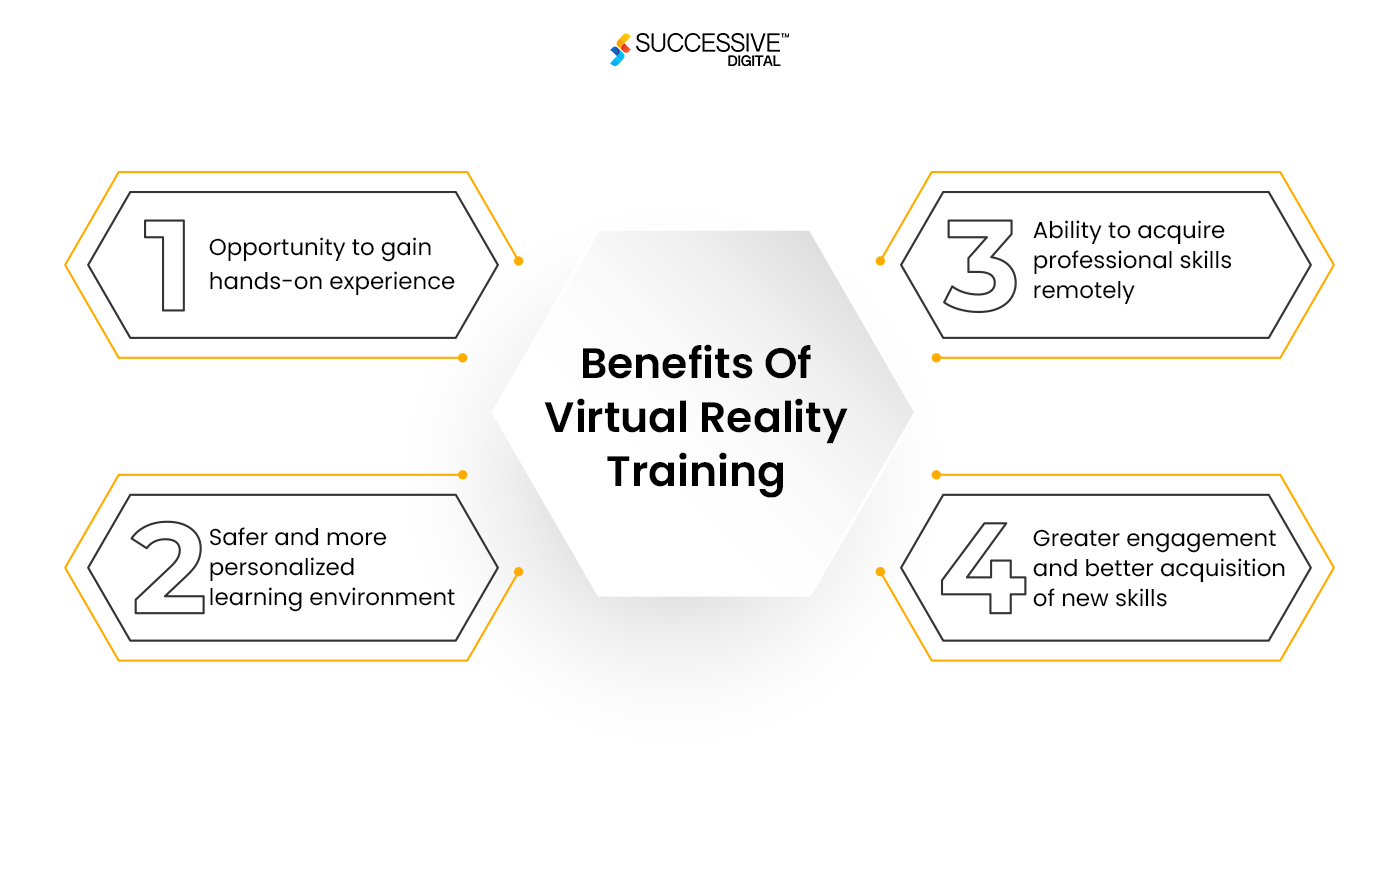 Overview of VR/AR Applications in Employee Training